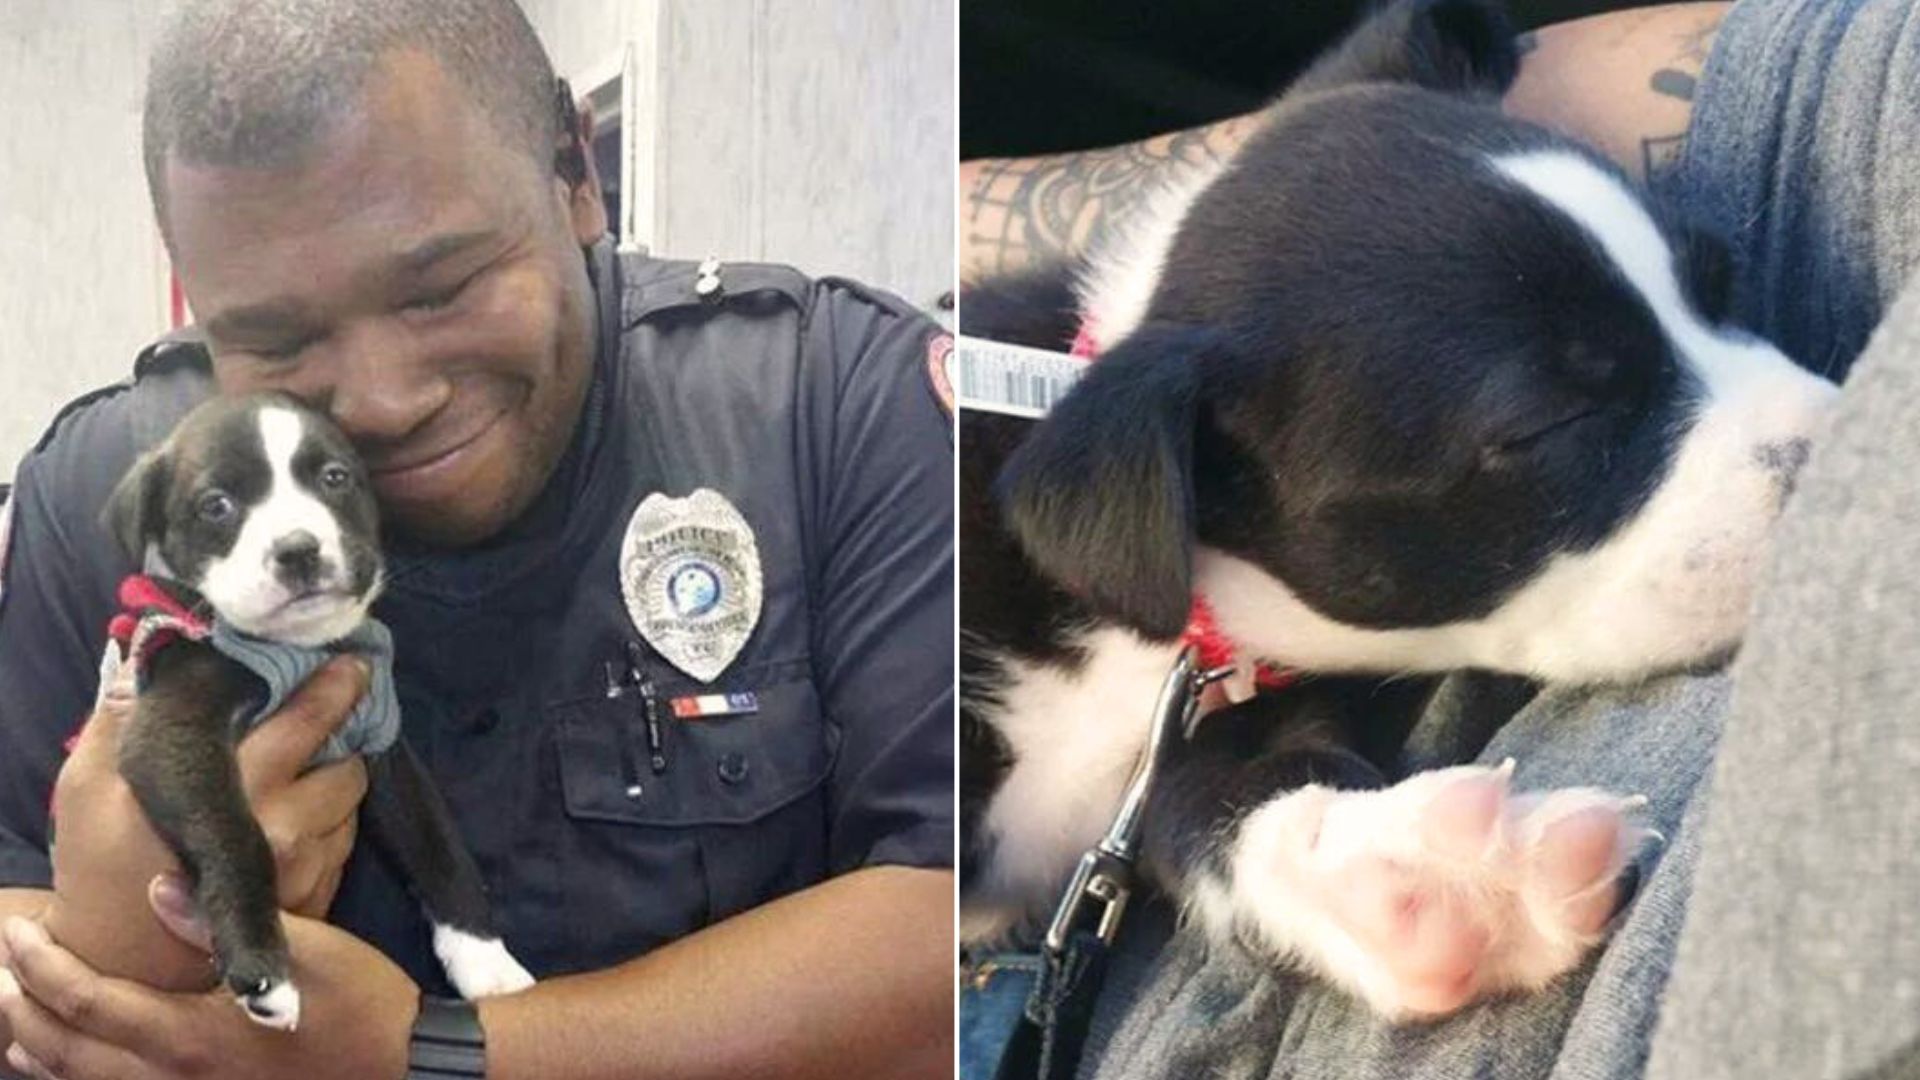 Police Officer “Arrests” An Adorable Puppy After A Routine Call At An Animal Shelter